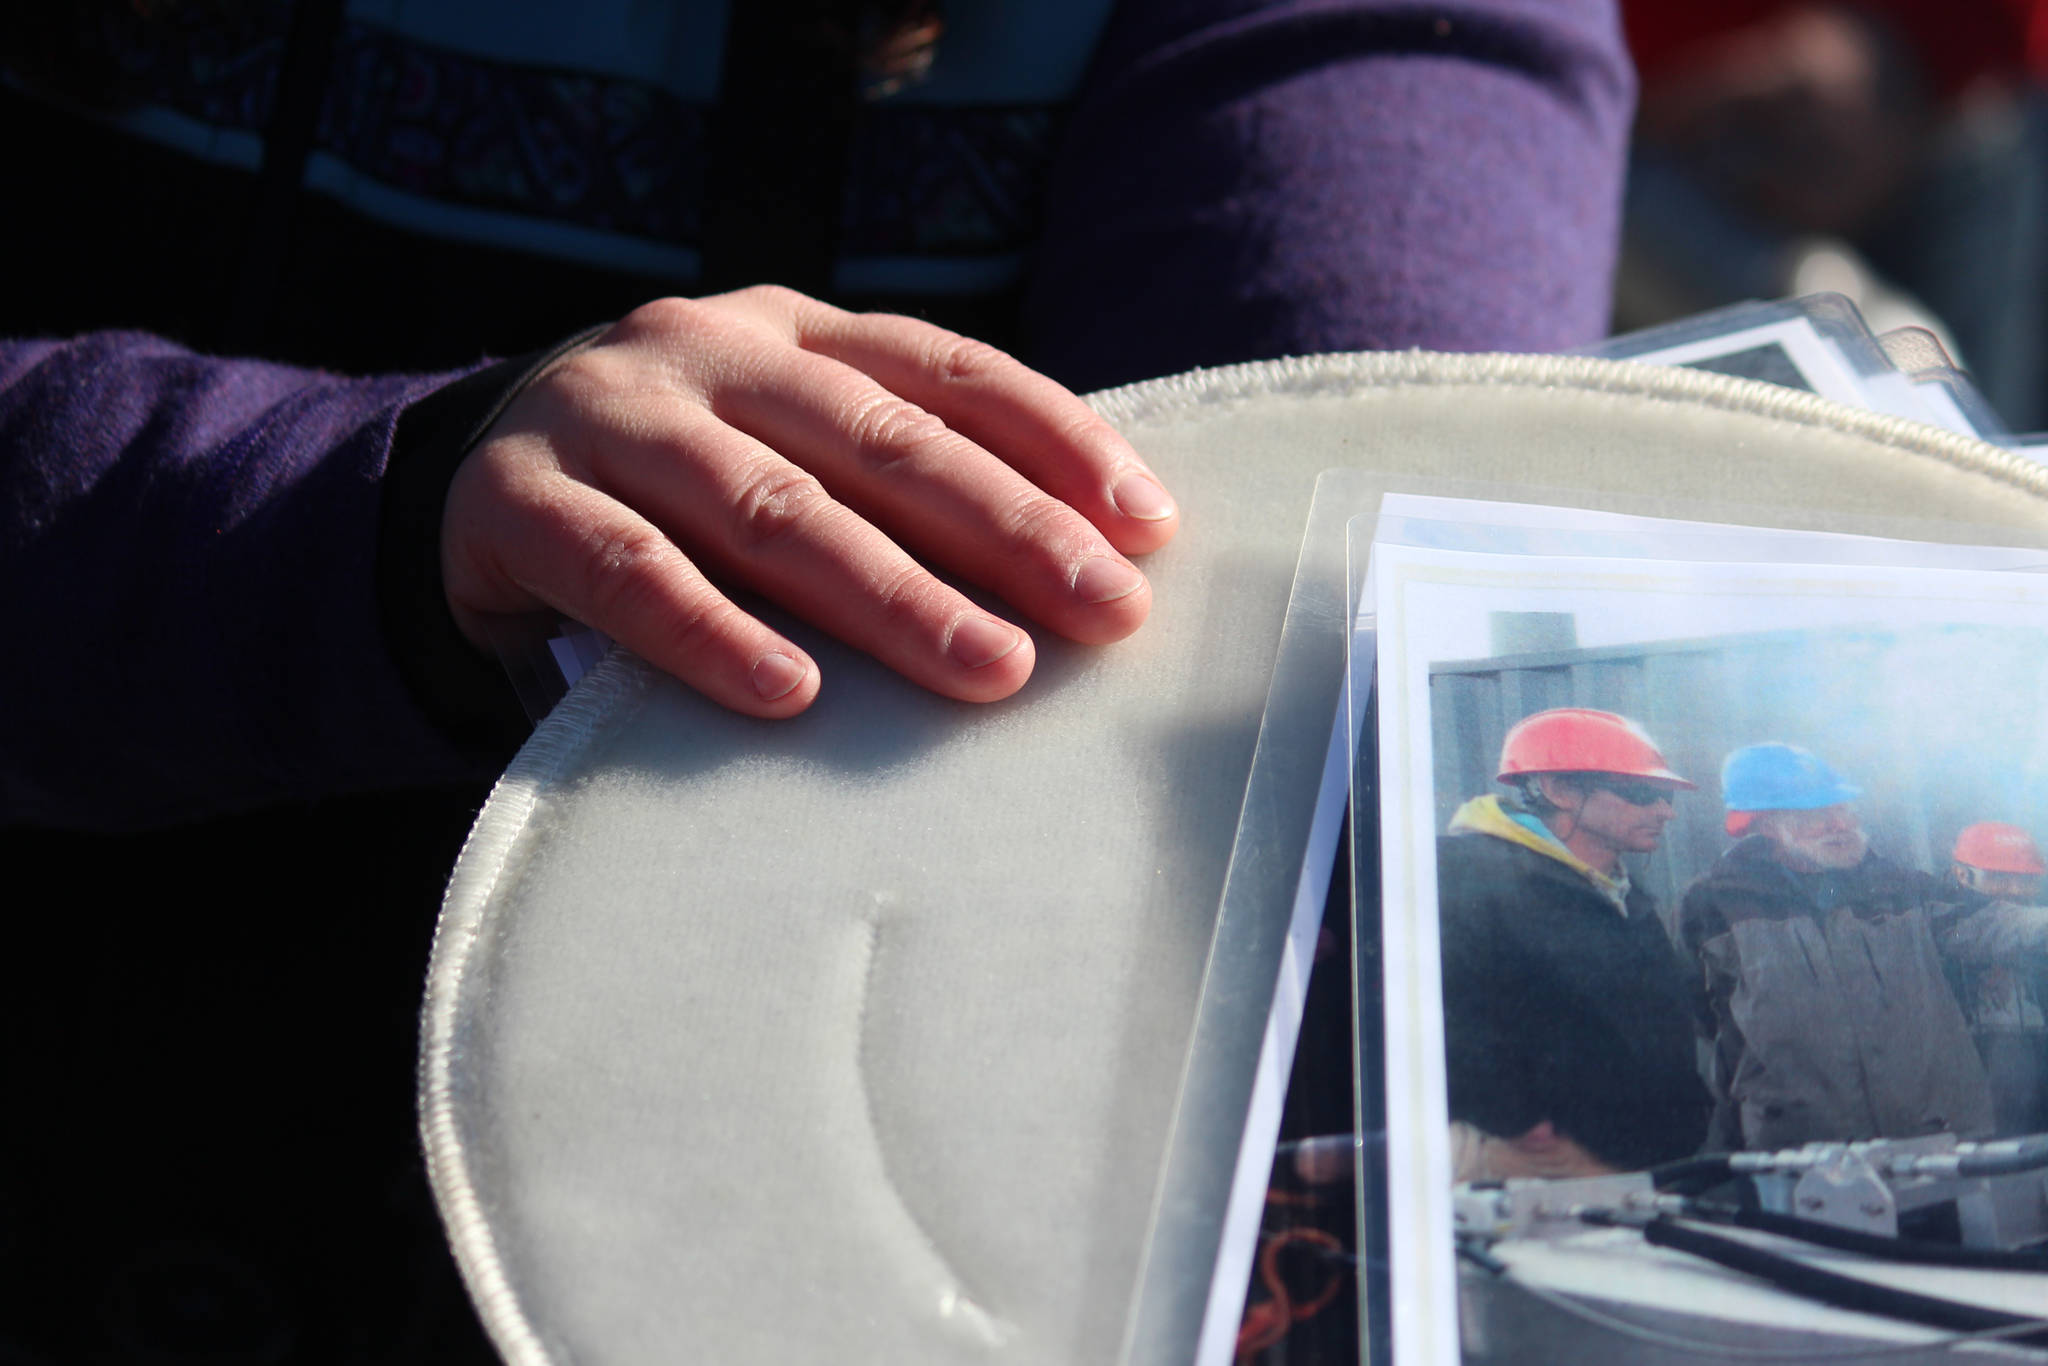 RCAC Outreach Coordinator Lisa Matlock shows Homer area residents aboard the Discovery an example of the filters used to catch oil during a spill while on a tour of annual oil spill response training in Kachemak Bay on Saturday, April 14, 2018 in Homer, Alaska. The public tour was a first for Homer and was hosted by the Prince William Sound Regional Citizens’ Advisory Council in conjunction with Alyeska Pipeline, Alaska Coastal Marine and the Center for Alaskan Coastal Studies. (Photo by Megan Pacer/Homer News)